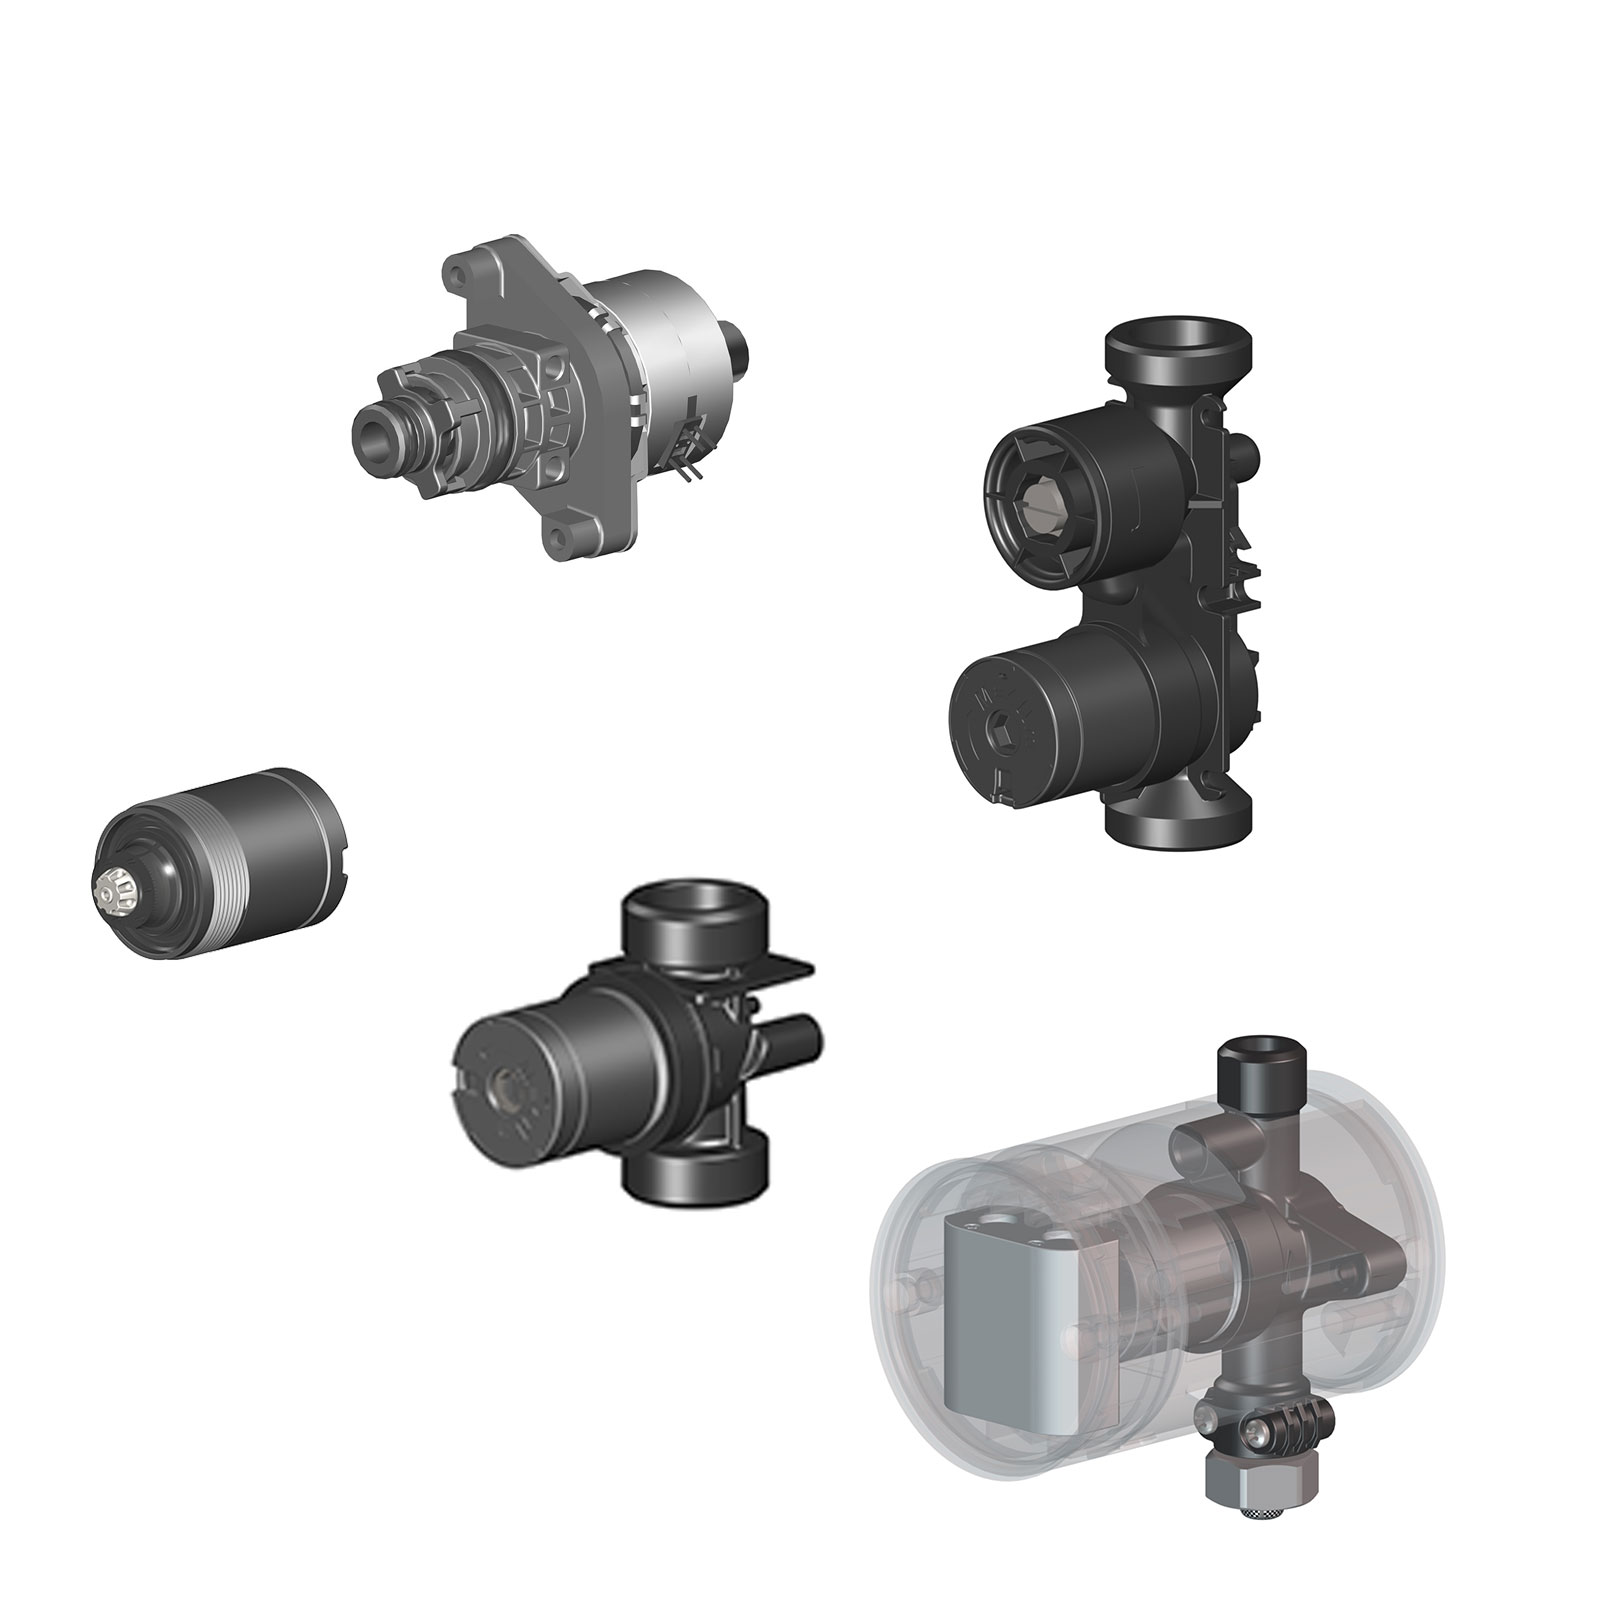 Selection of Aquis hydraulic units and solenoid valves